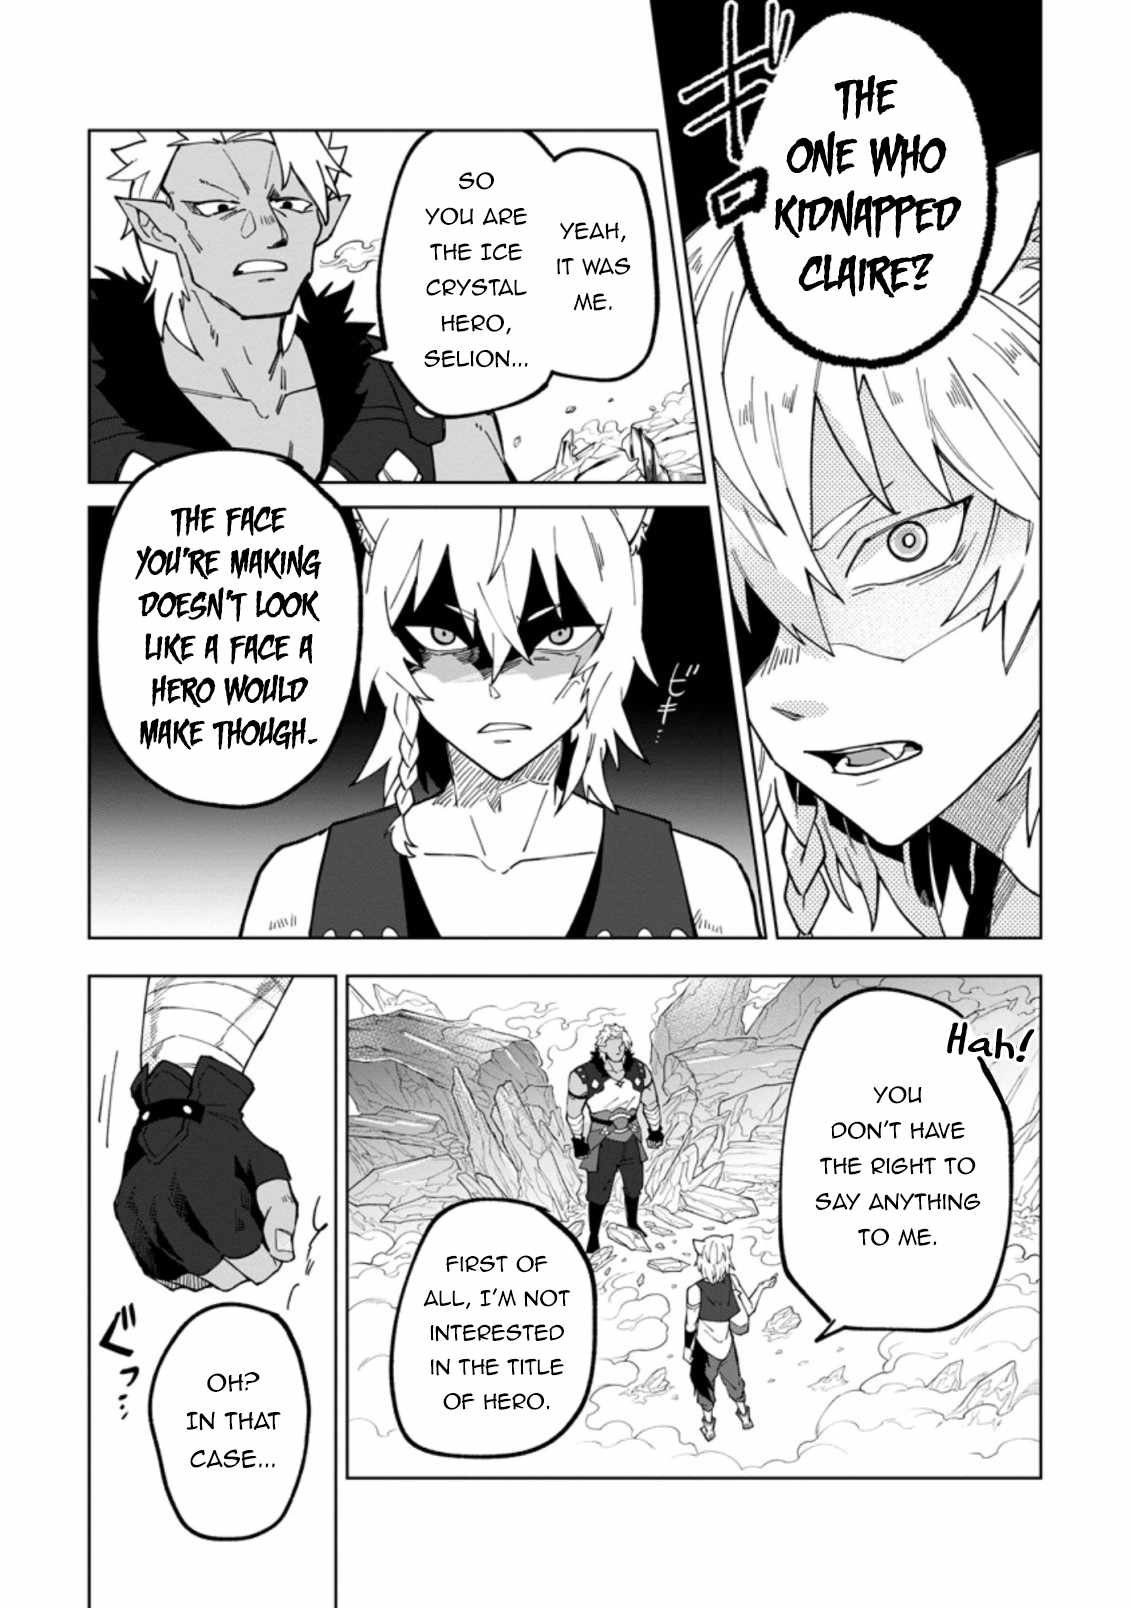 The White Mage Who Was Banished From the Hero's Party Is Picked up by an S Rank Adventurer ~ This White Mage Is Too Out of the Ordinary! Chapter 17-1-eng-li - Page 7